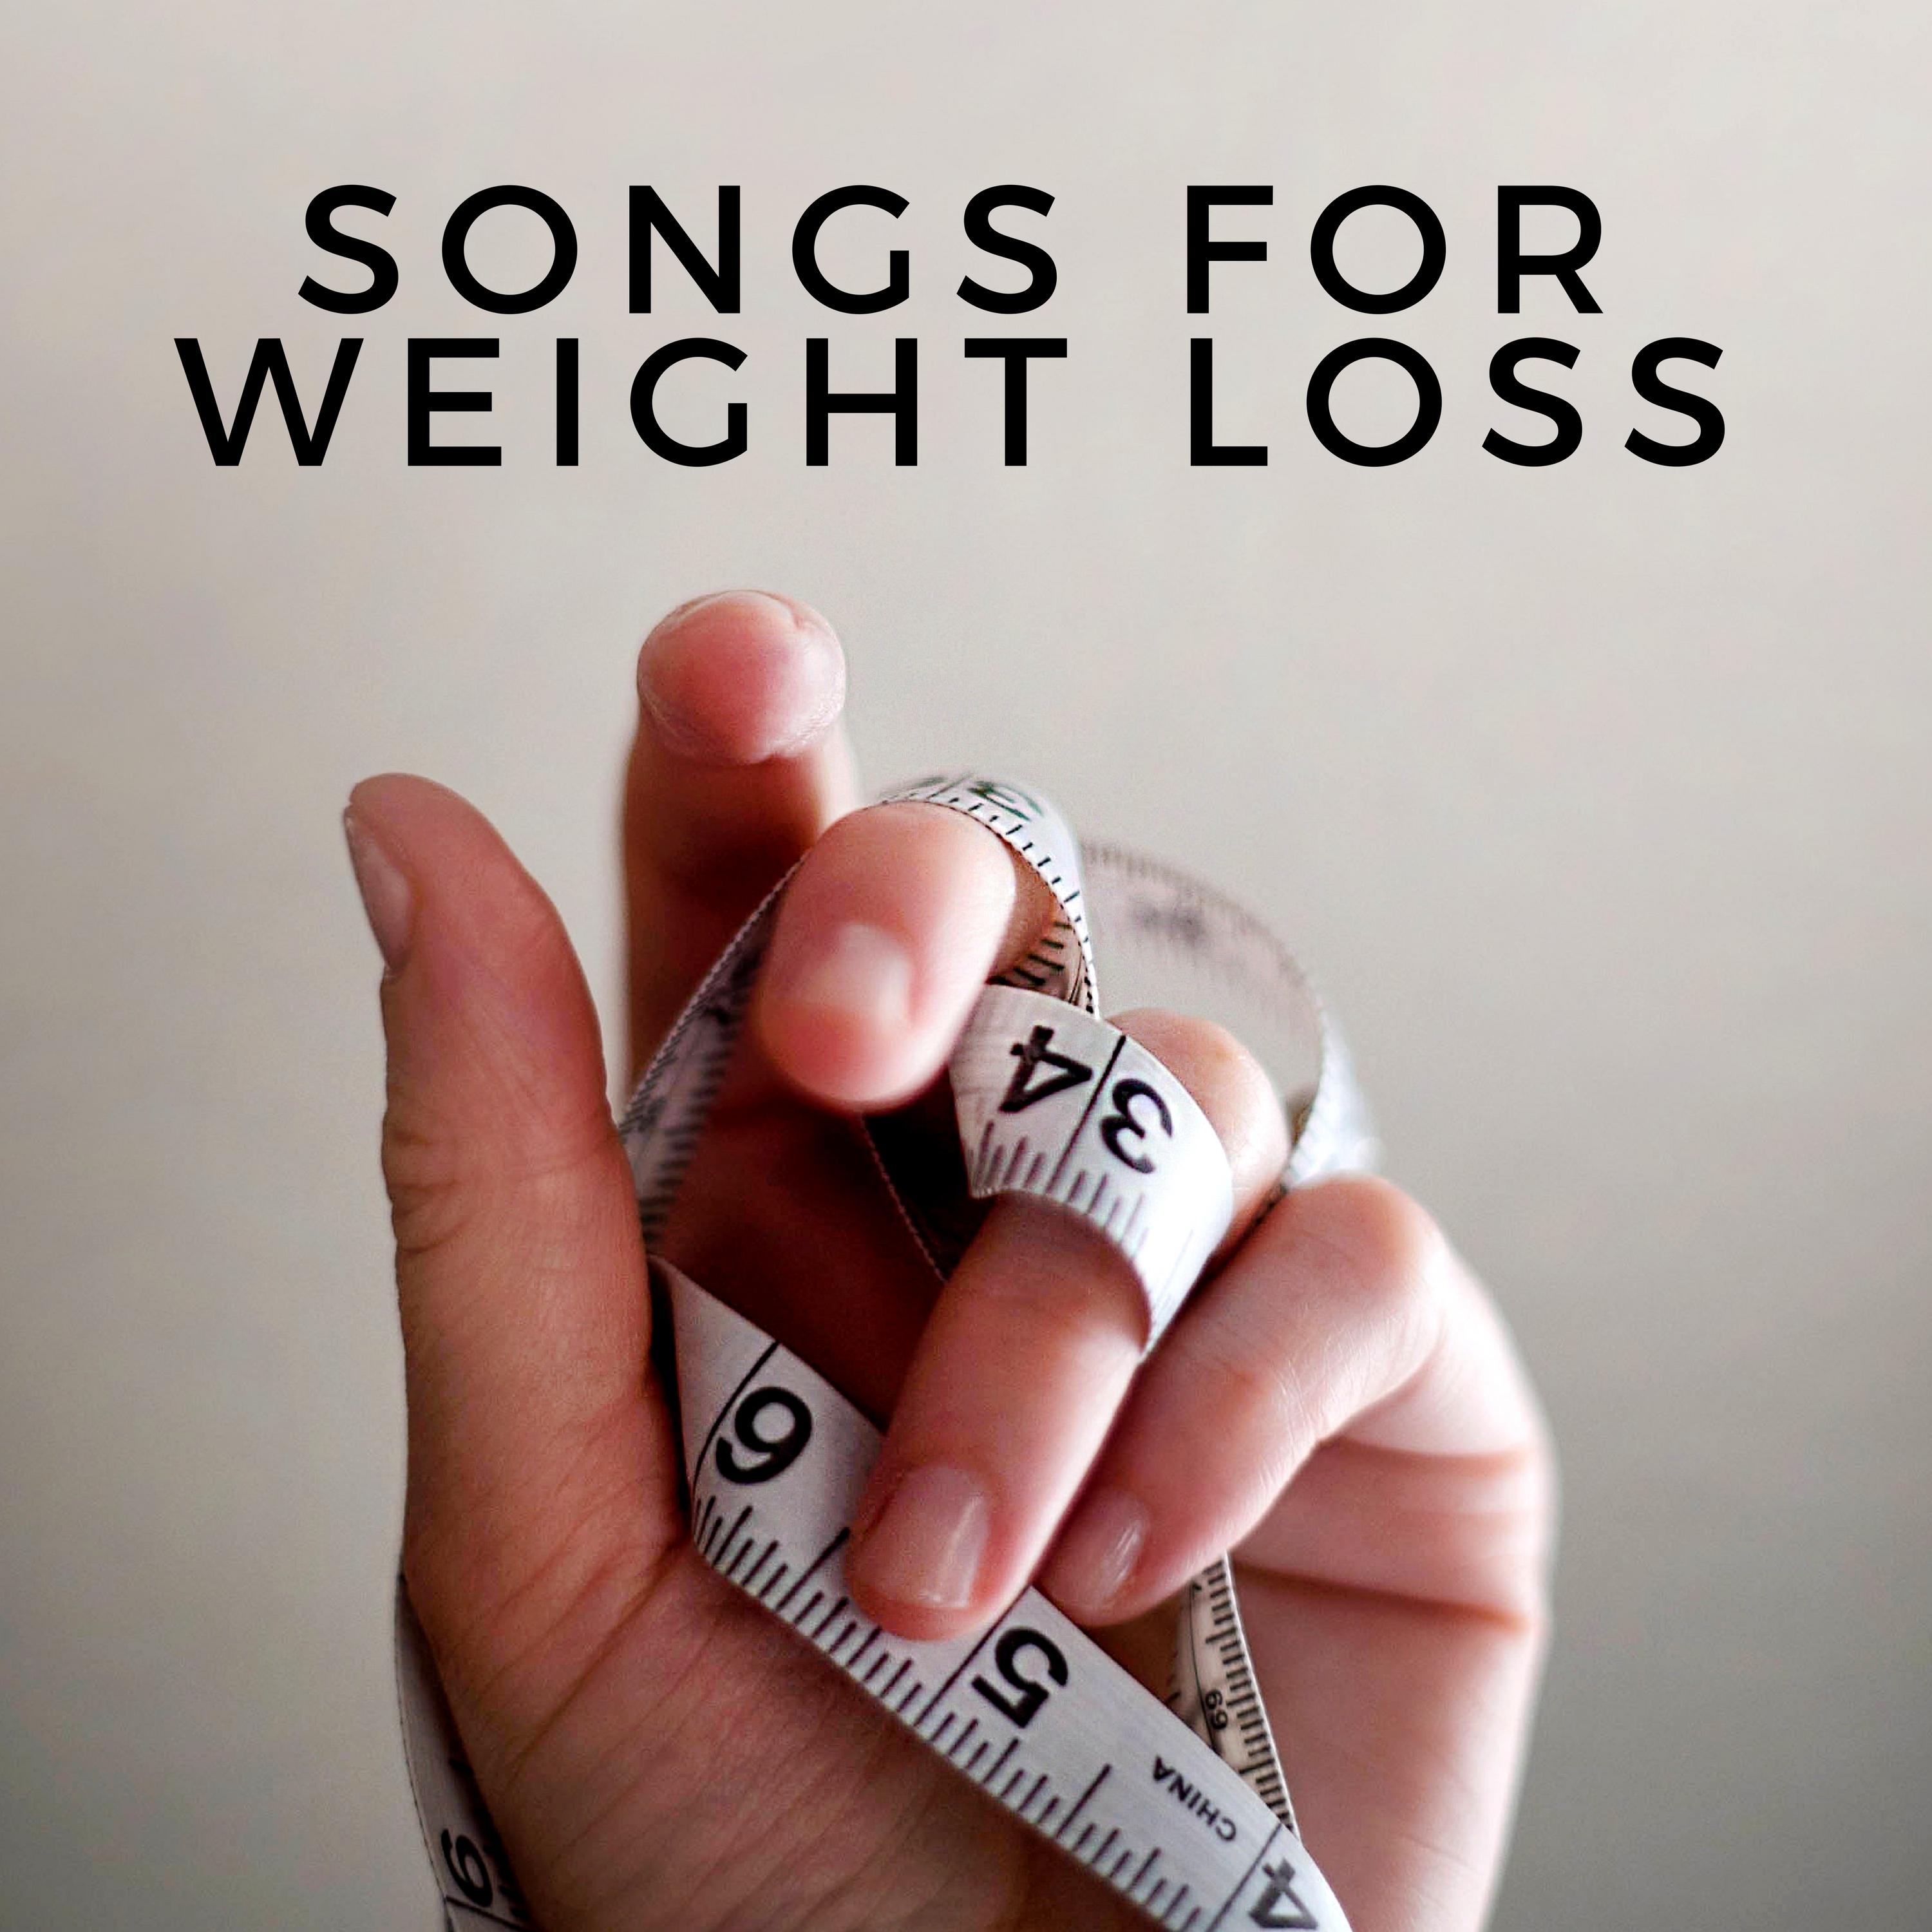 Songs for Weight Loss